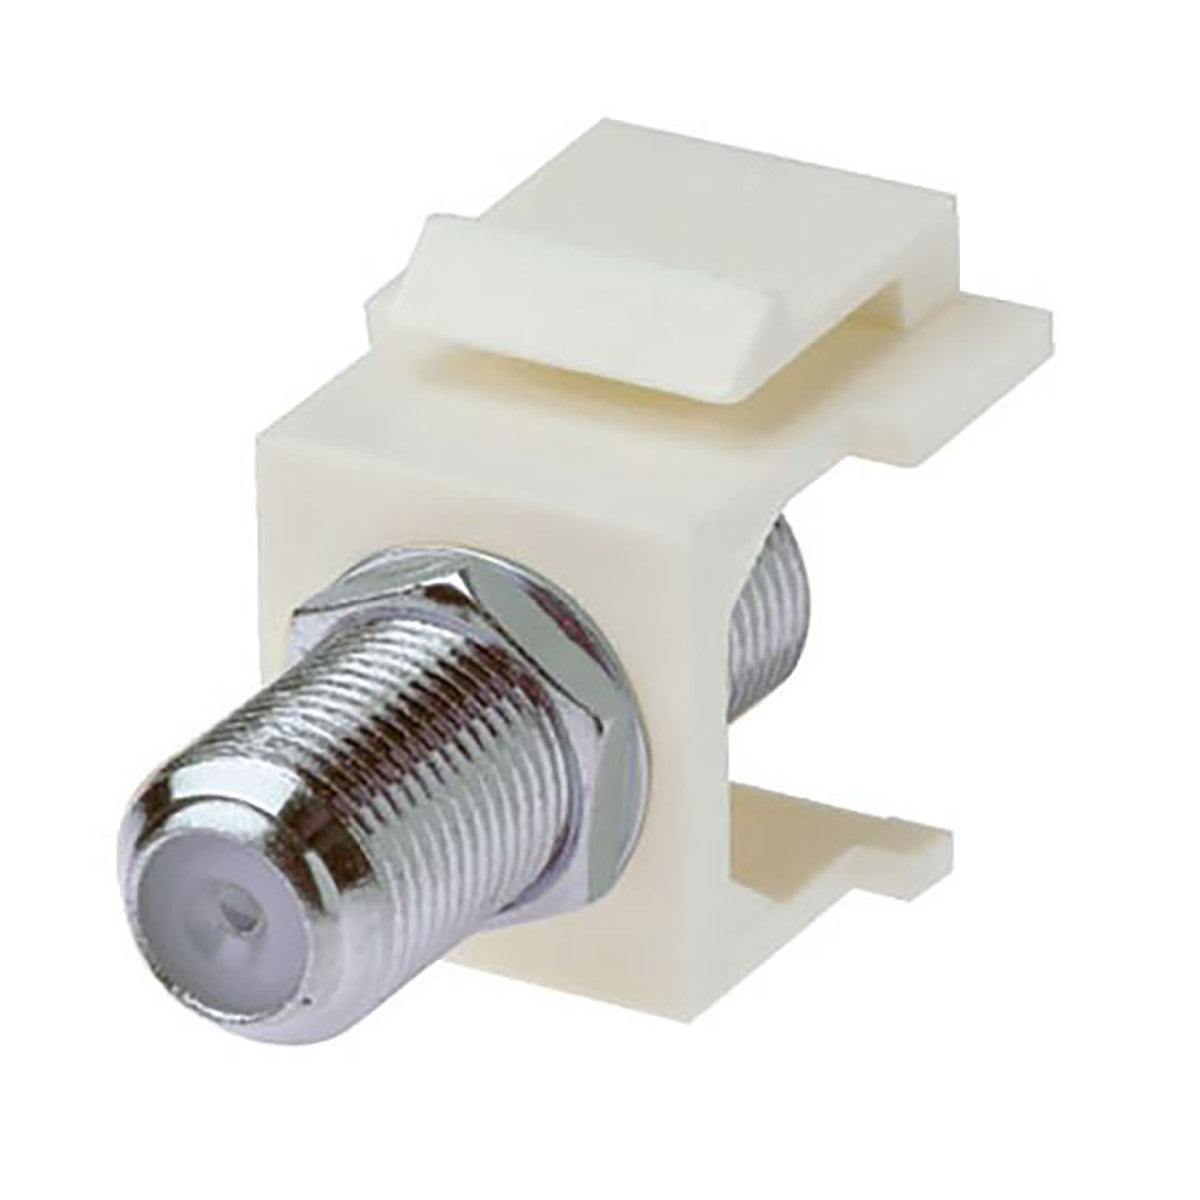 1 GHz F-Connector - Keystone Snap-In Insert, Female to Female, Nickle Plated, UL - White 10 Pack